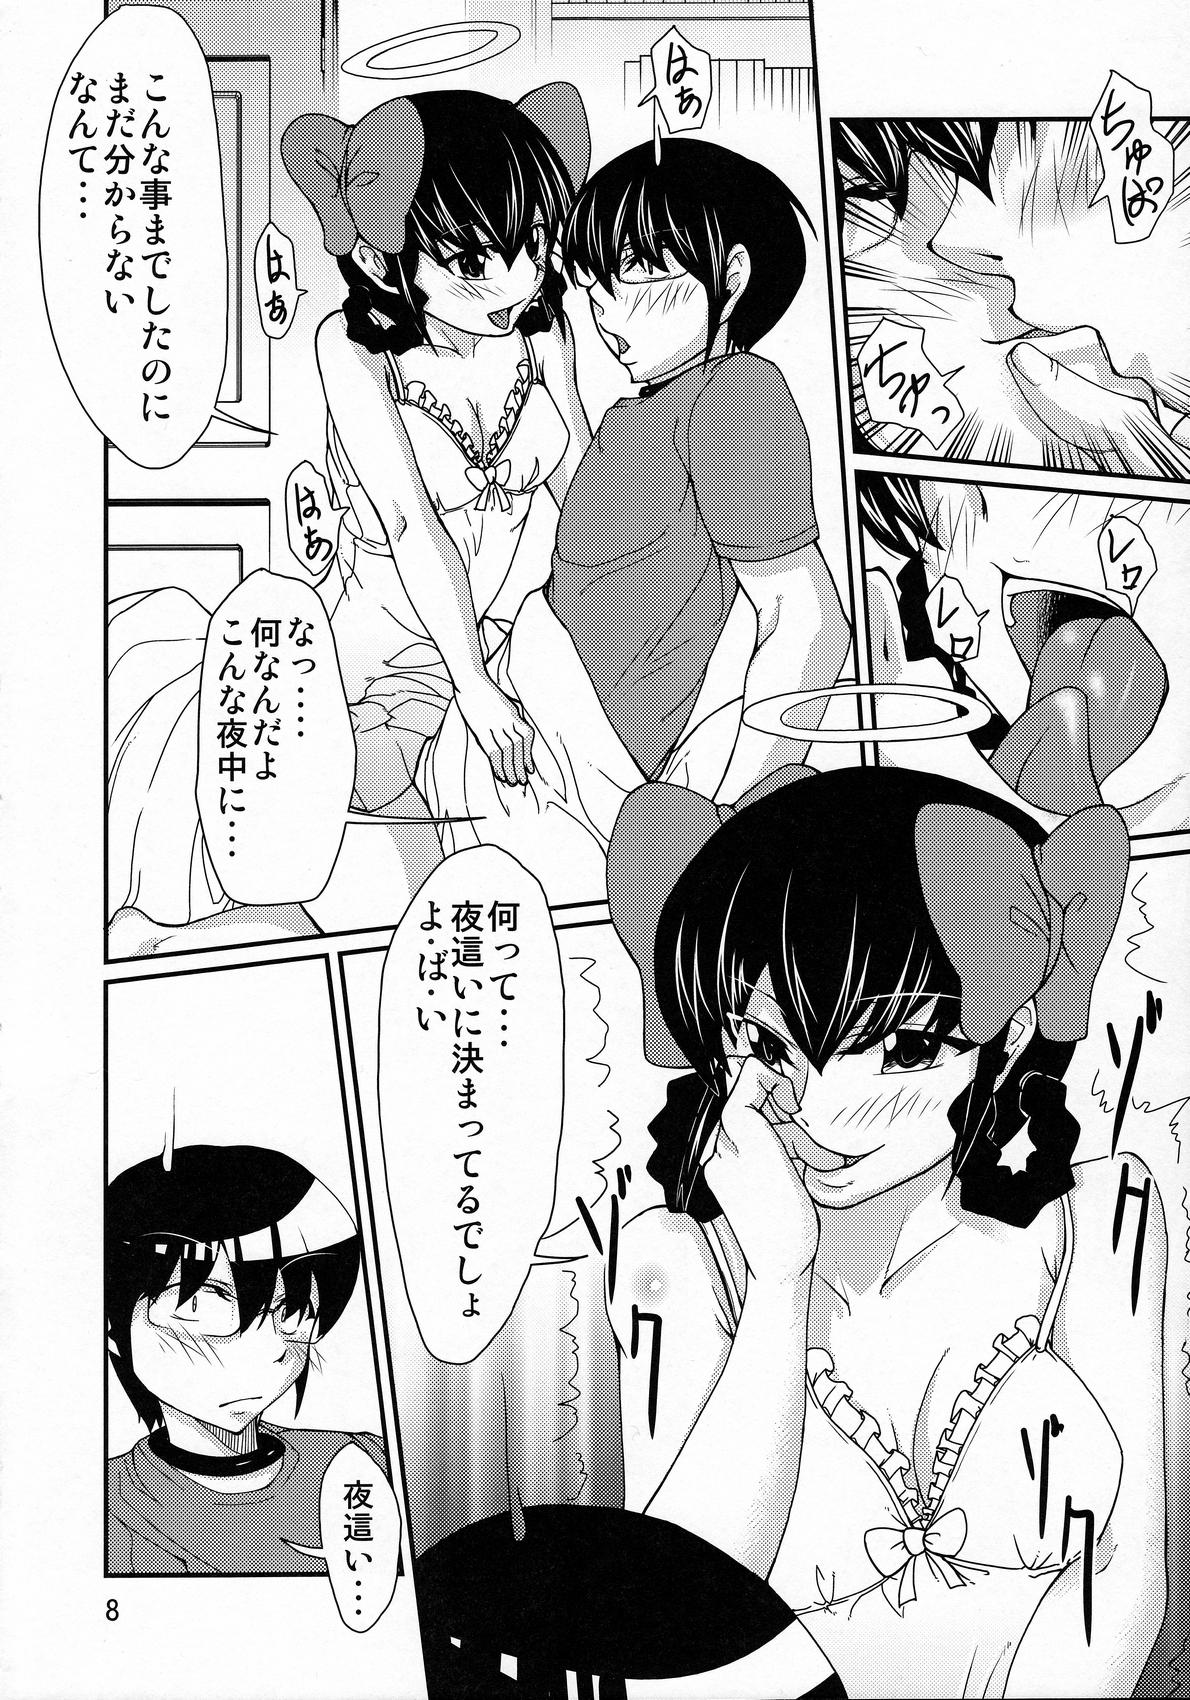 Pussyfucking Megami no Saihai - The world god only knows Bathroom - Page 7